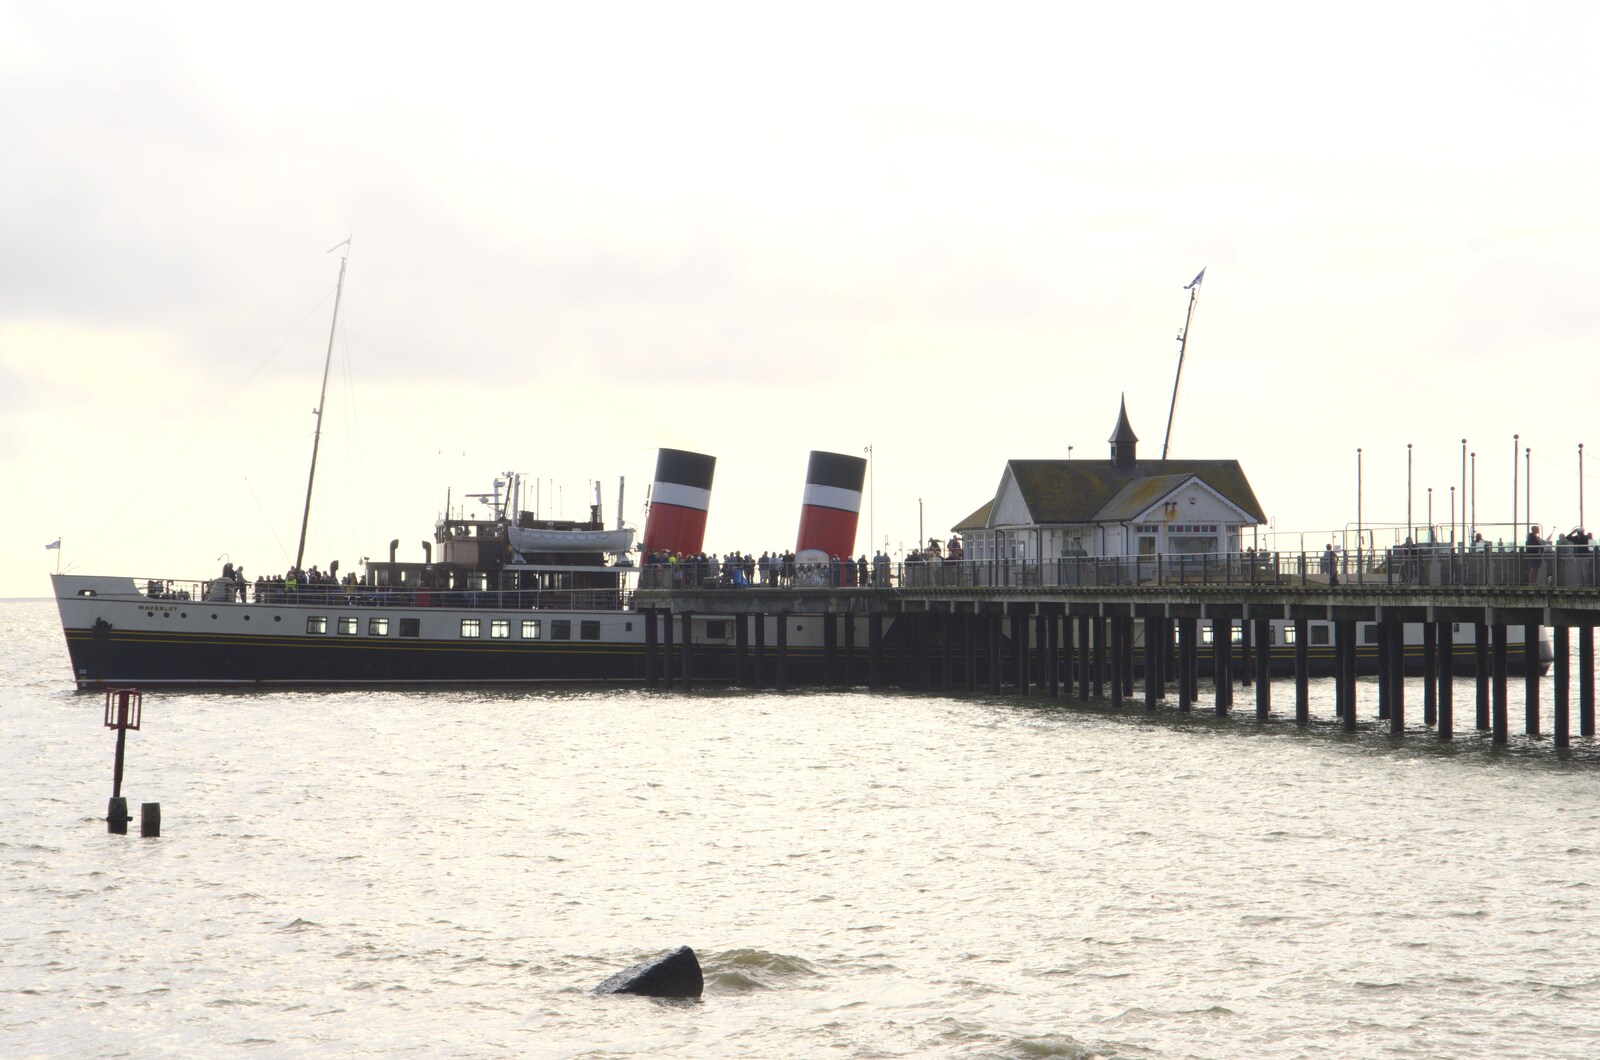 The paddle steamer Waverley at Southwold Pier from The Waverley Paddle Steamer at Southwold Pier, Suffolk - 27th September 2023